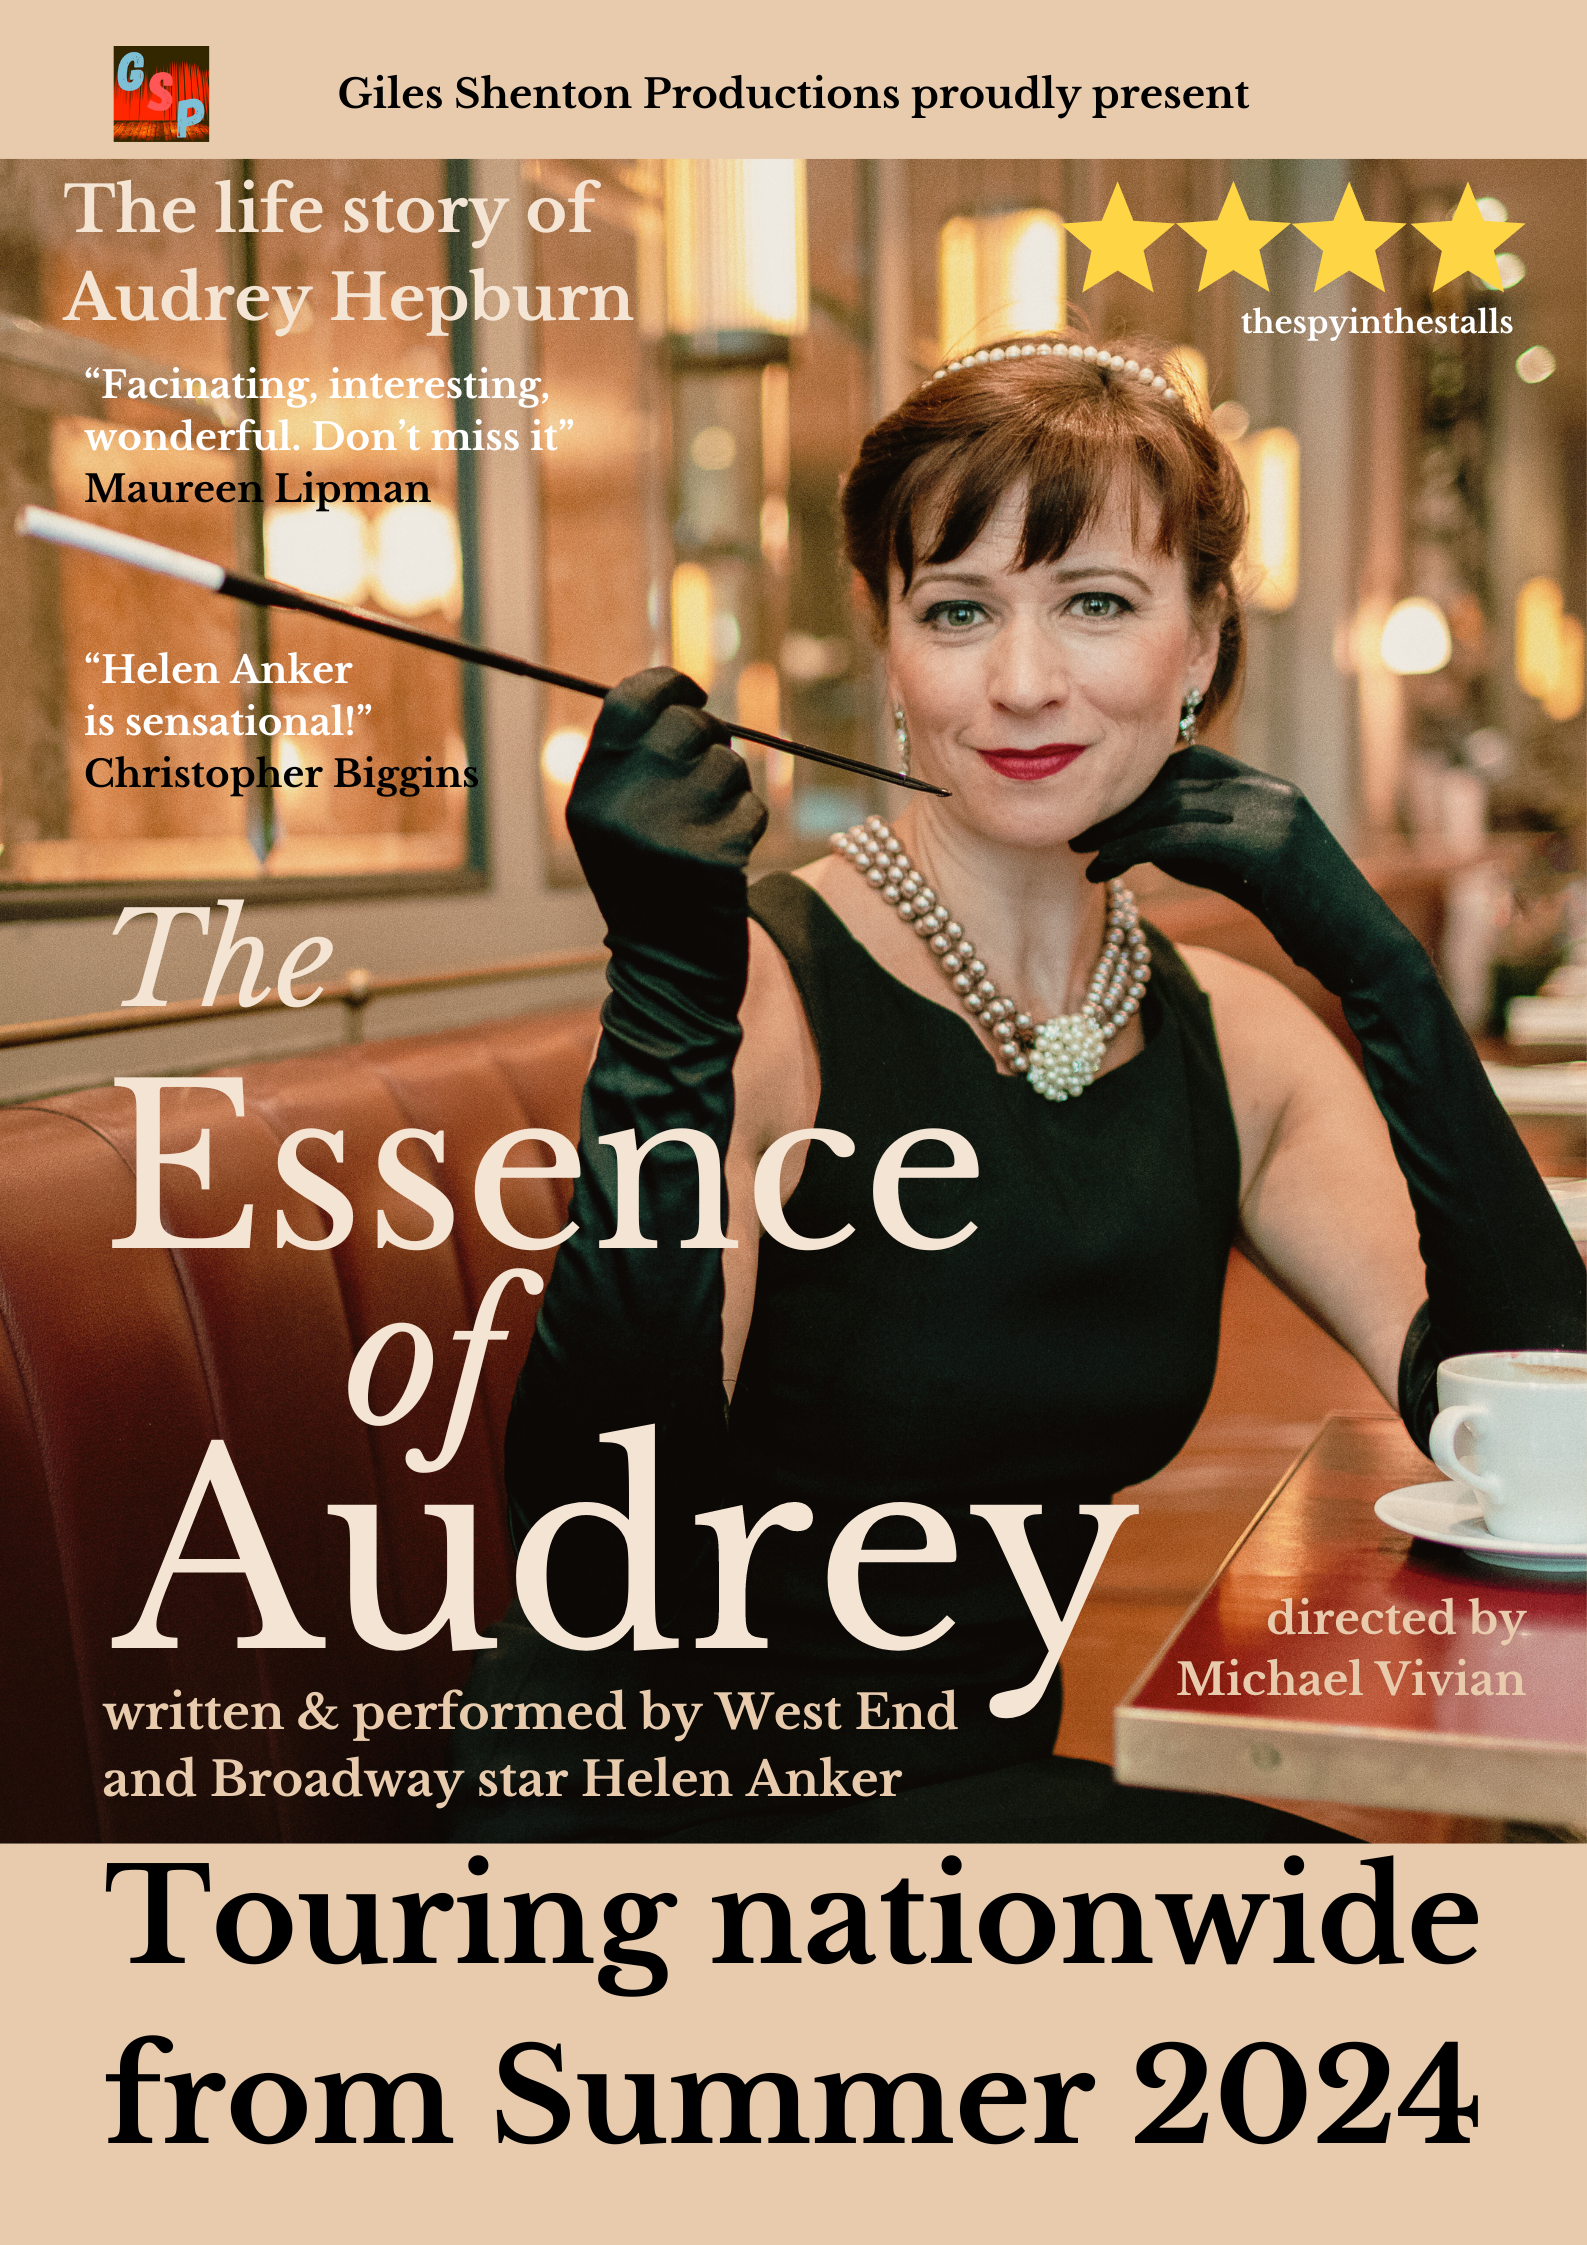 Image representing The Essence of Audrey - A one woman play by Helen Anker from The Astor Theatre